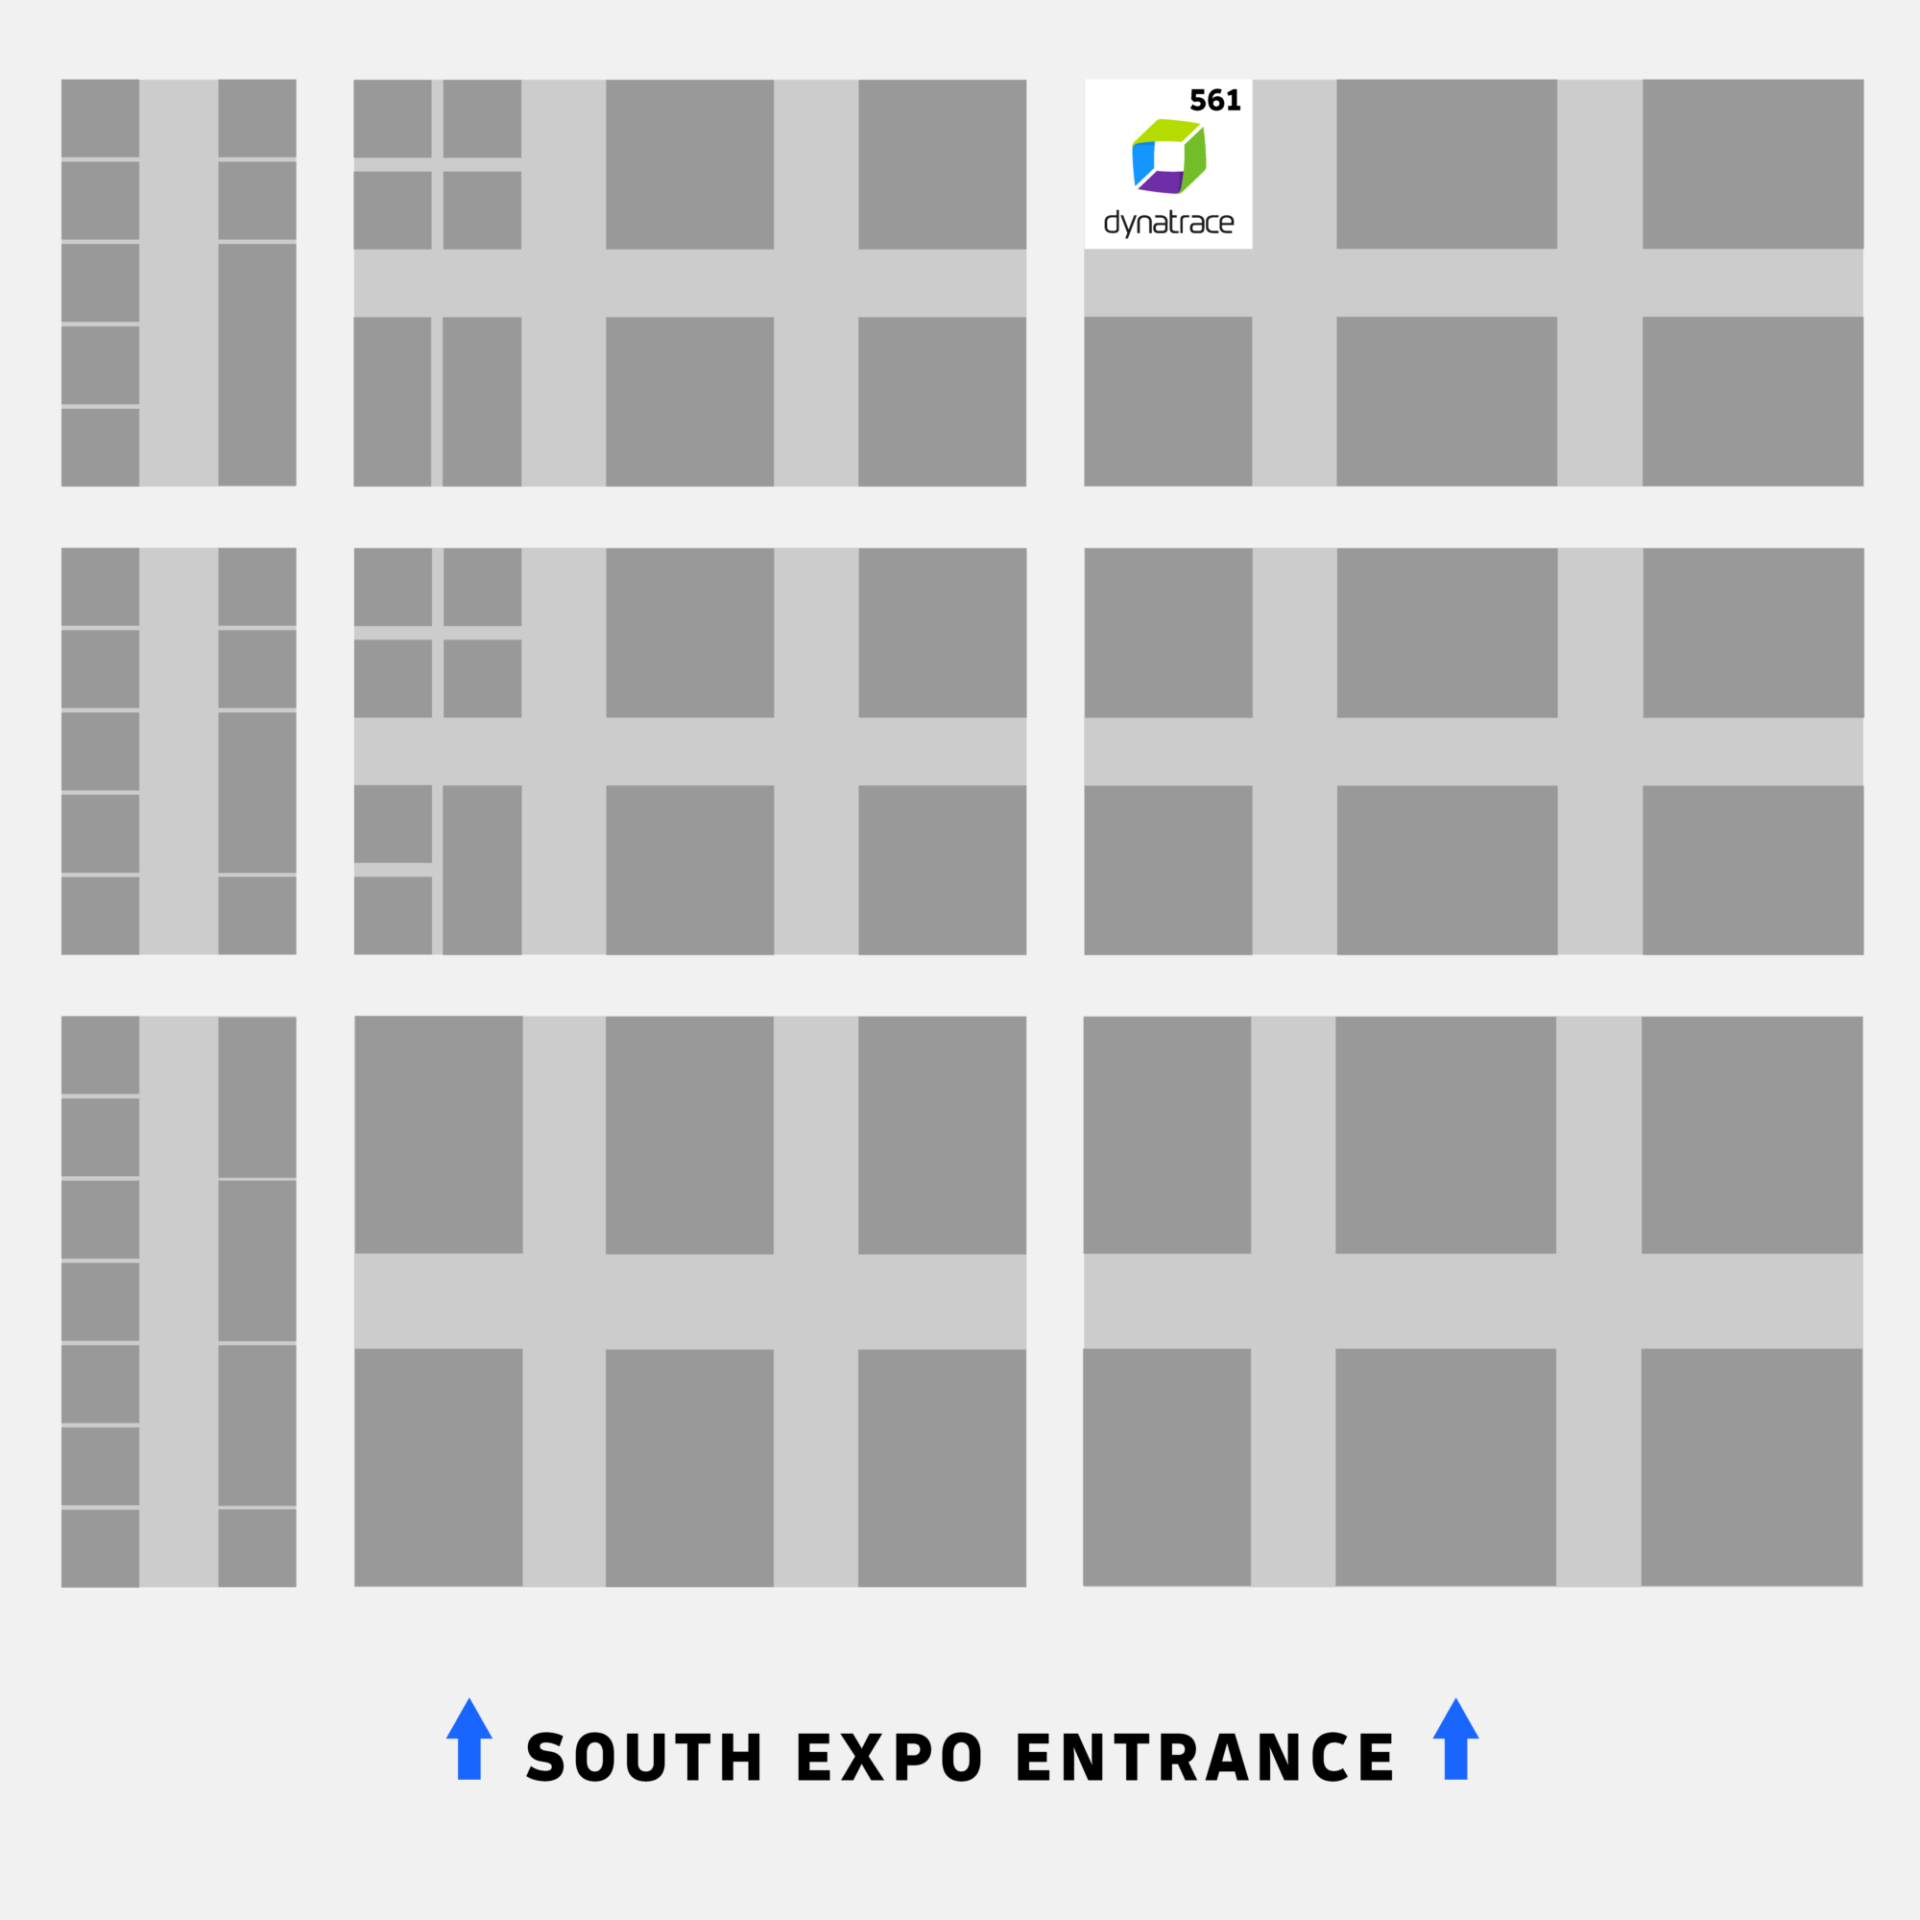 BAE12064 ILL RSA EXPO Floor Plans DT Locations South FINAL